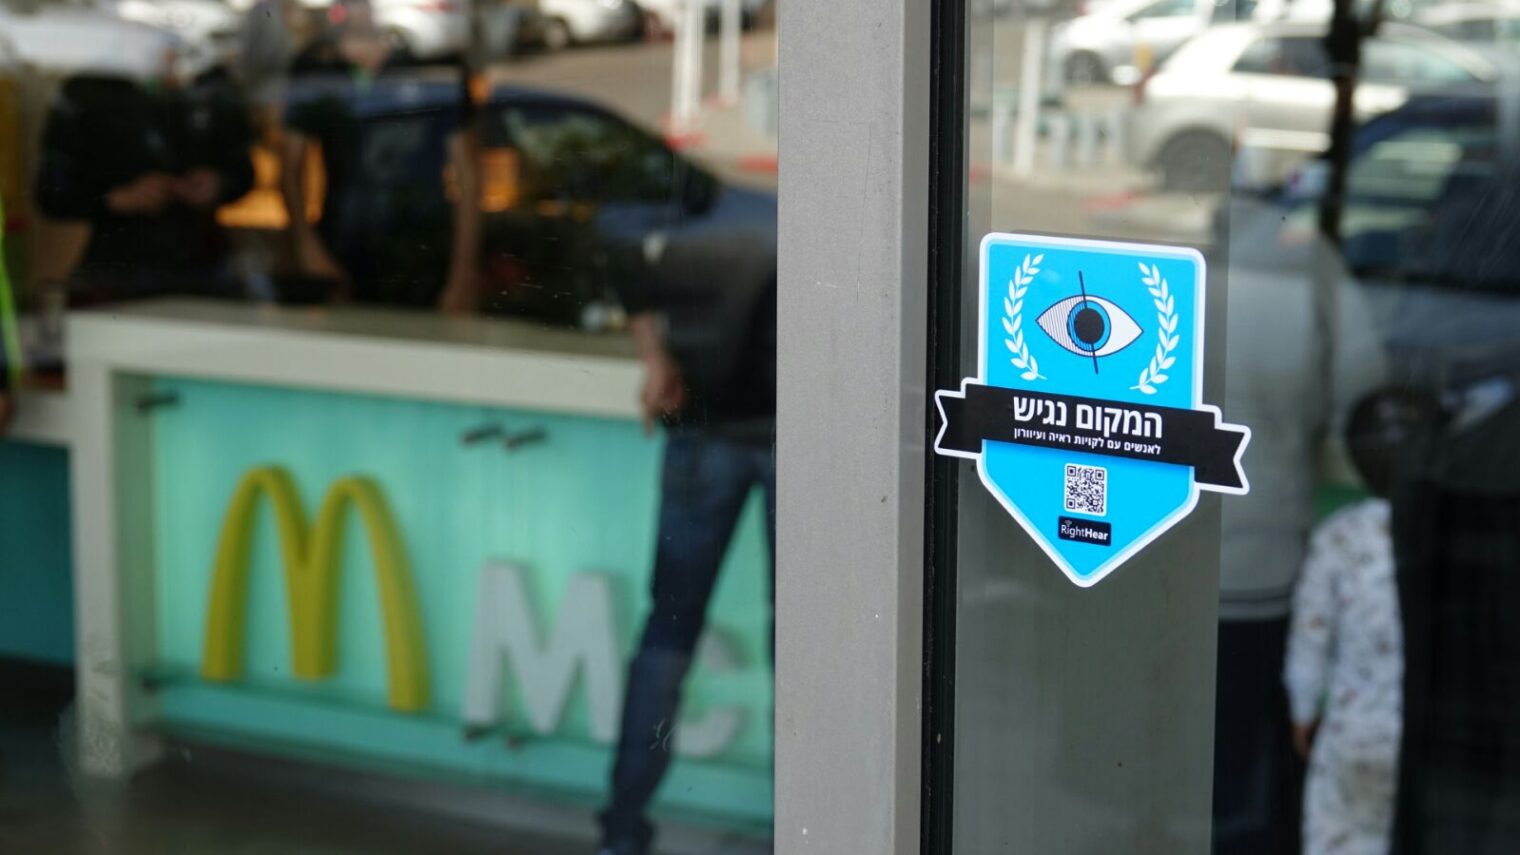 The sign on this Israeli McDonald’s restaurant says, “This place is accessible to people with vision impairment and the blind.” Photo courtesy of RightHear